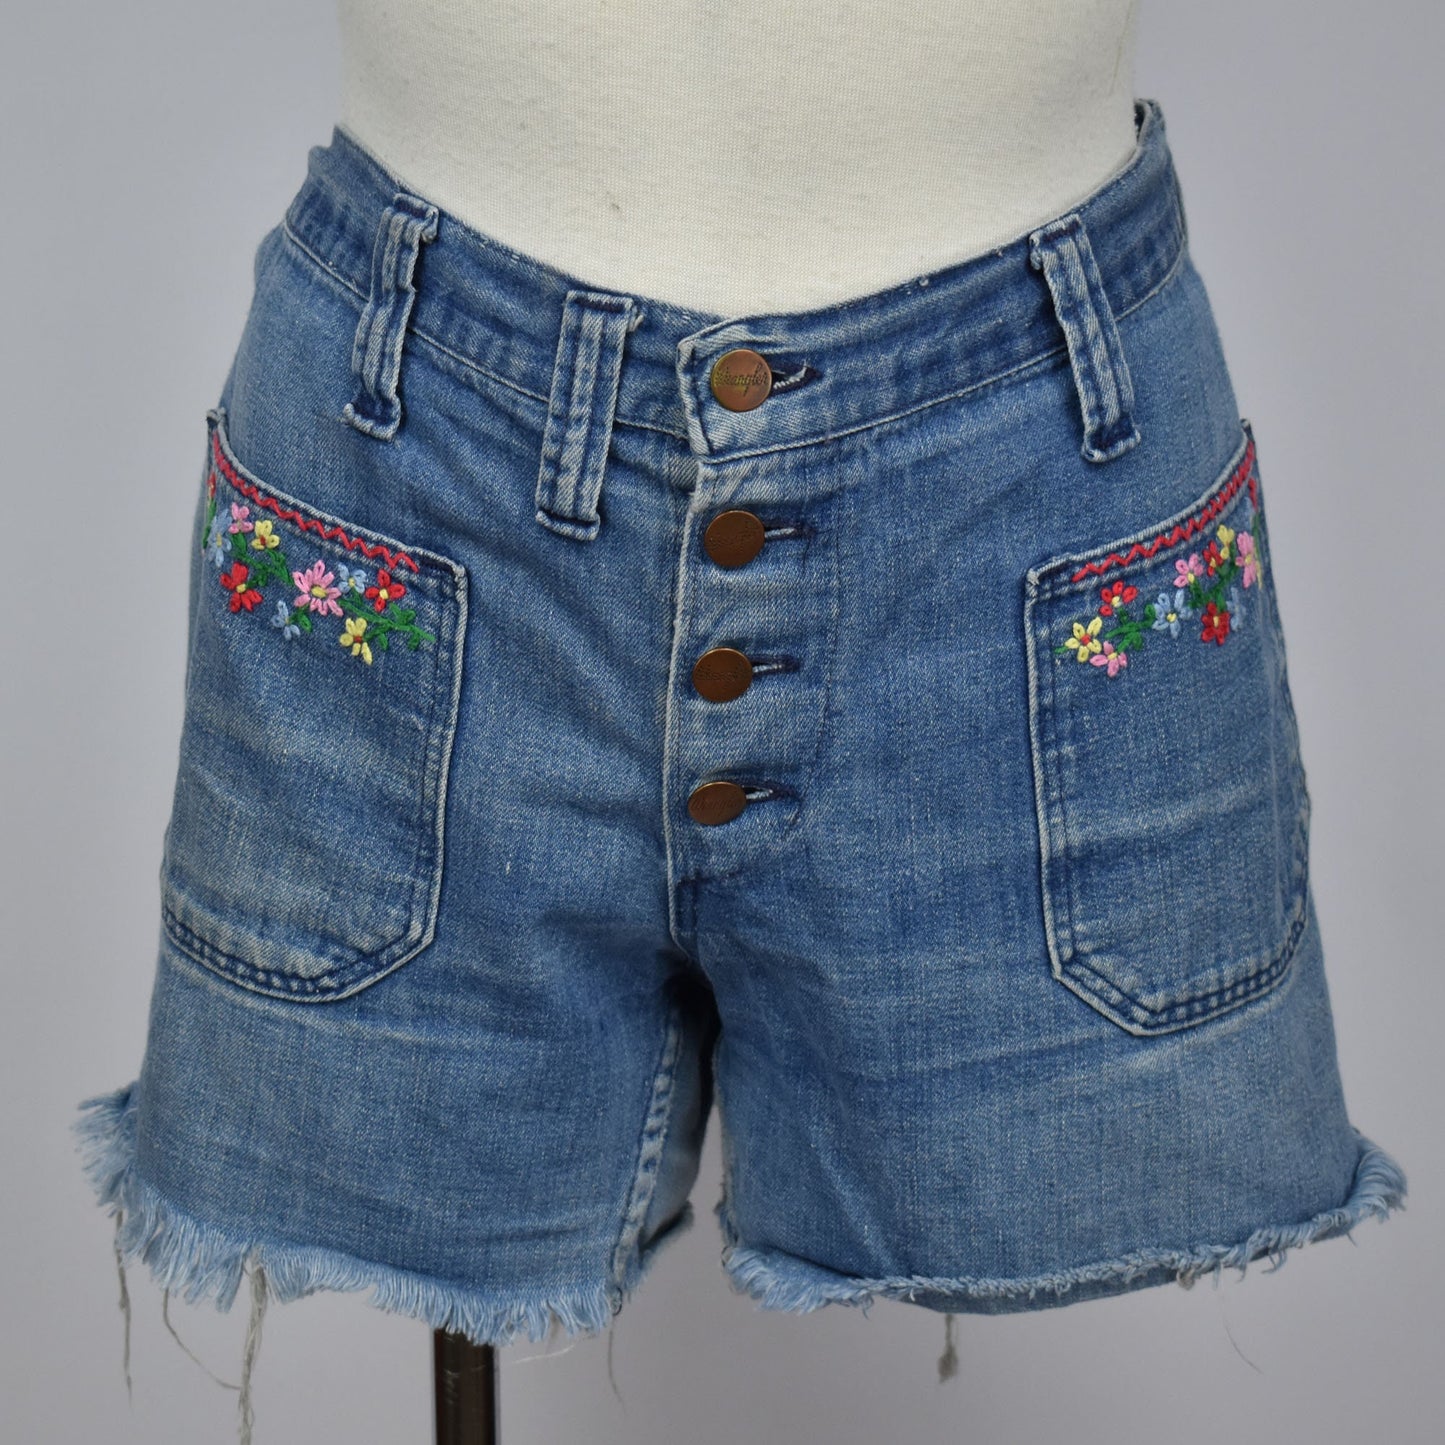 Vintage 60s Wrangler Denim Hand Embroidered Shorts - Made in USA